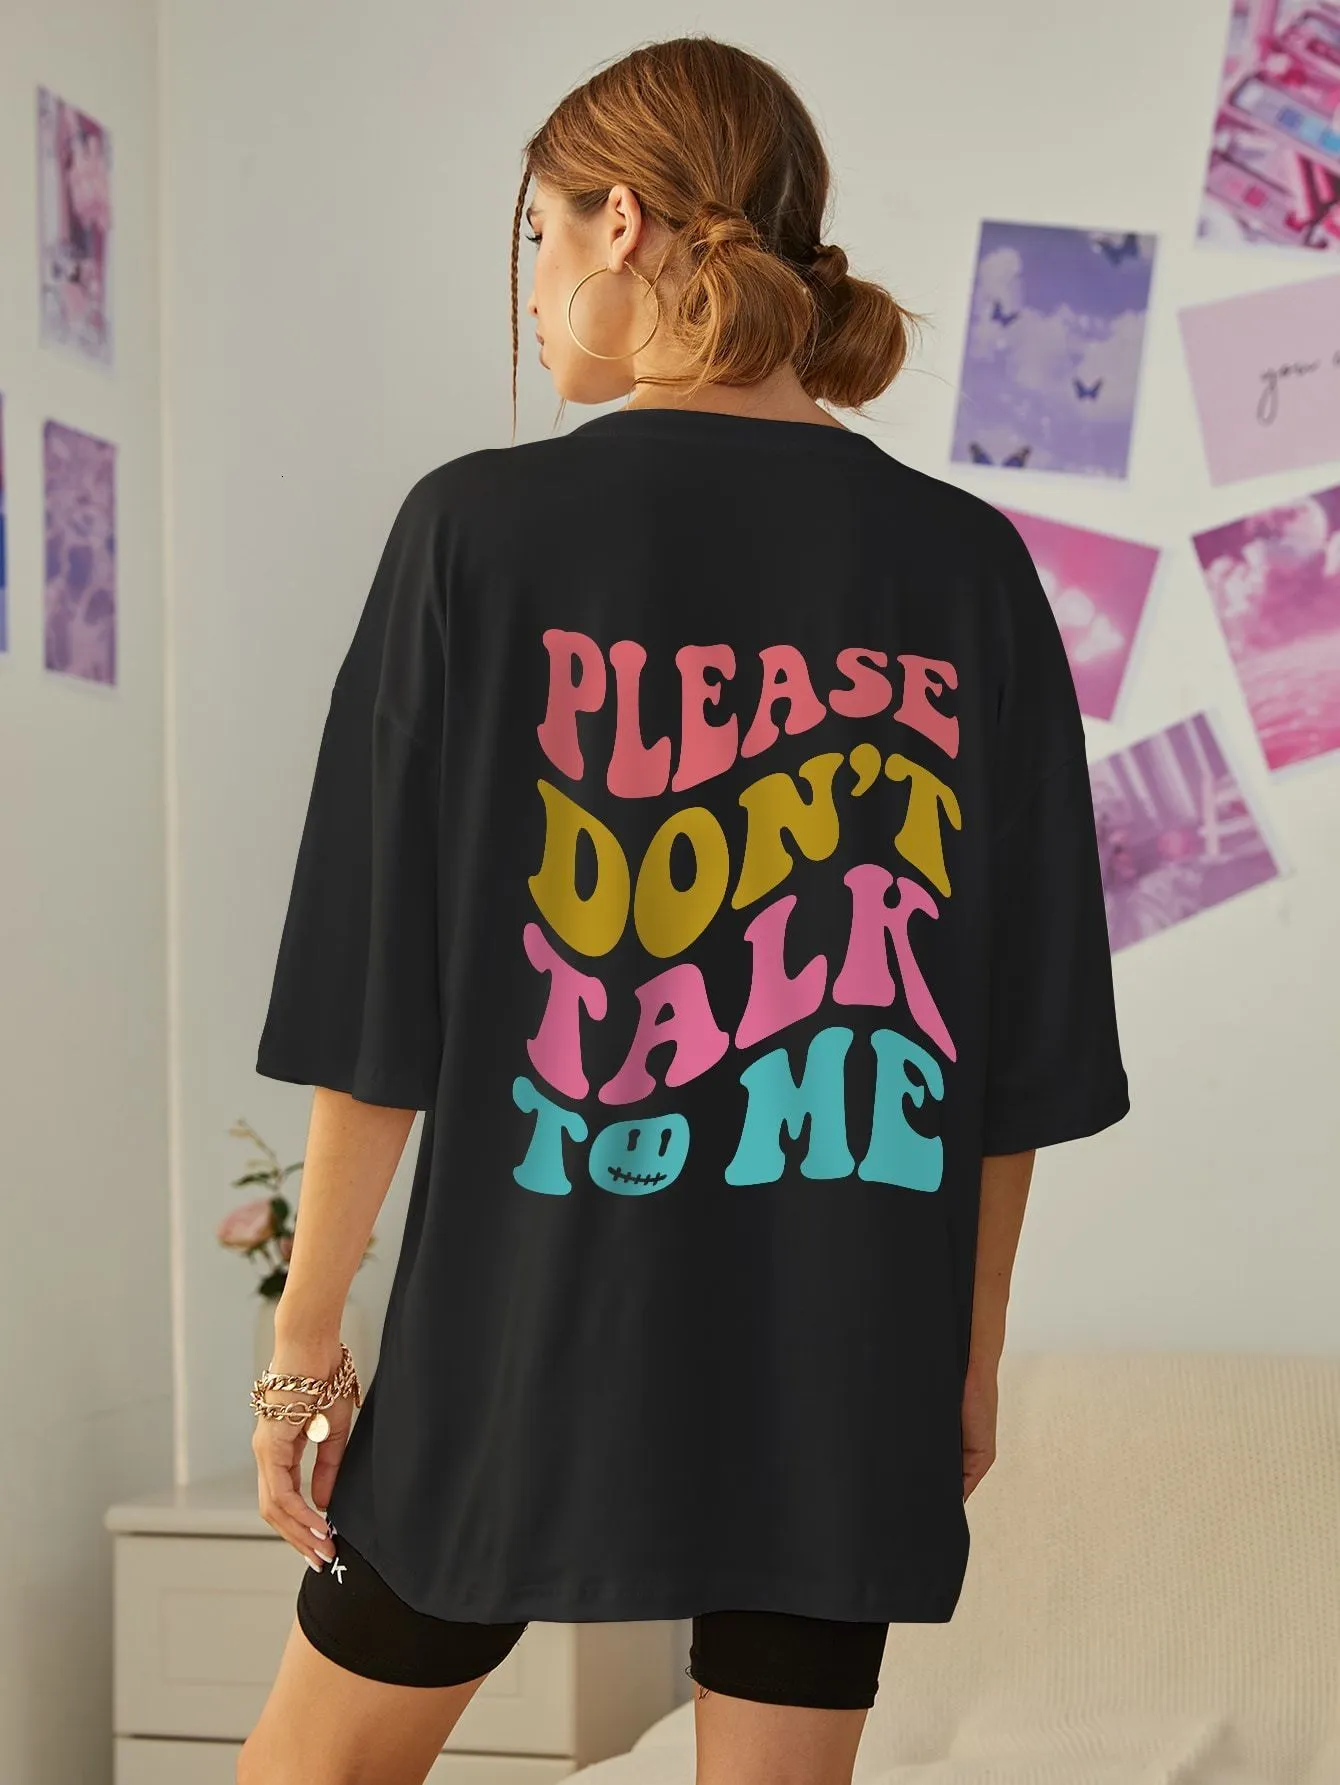 Womens TShirt Please dont talk tome Colored letter slogans TShirt Women ONeck Oversize Short Sleeve Cotton Brand Shoulder Drop Tee Clothing 230503